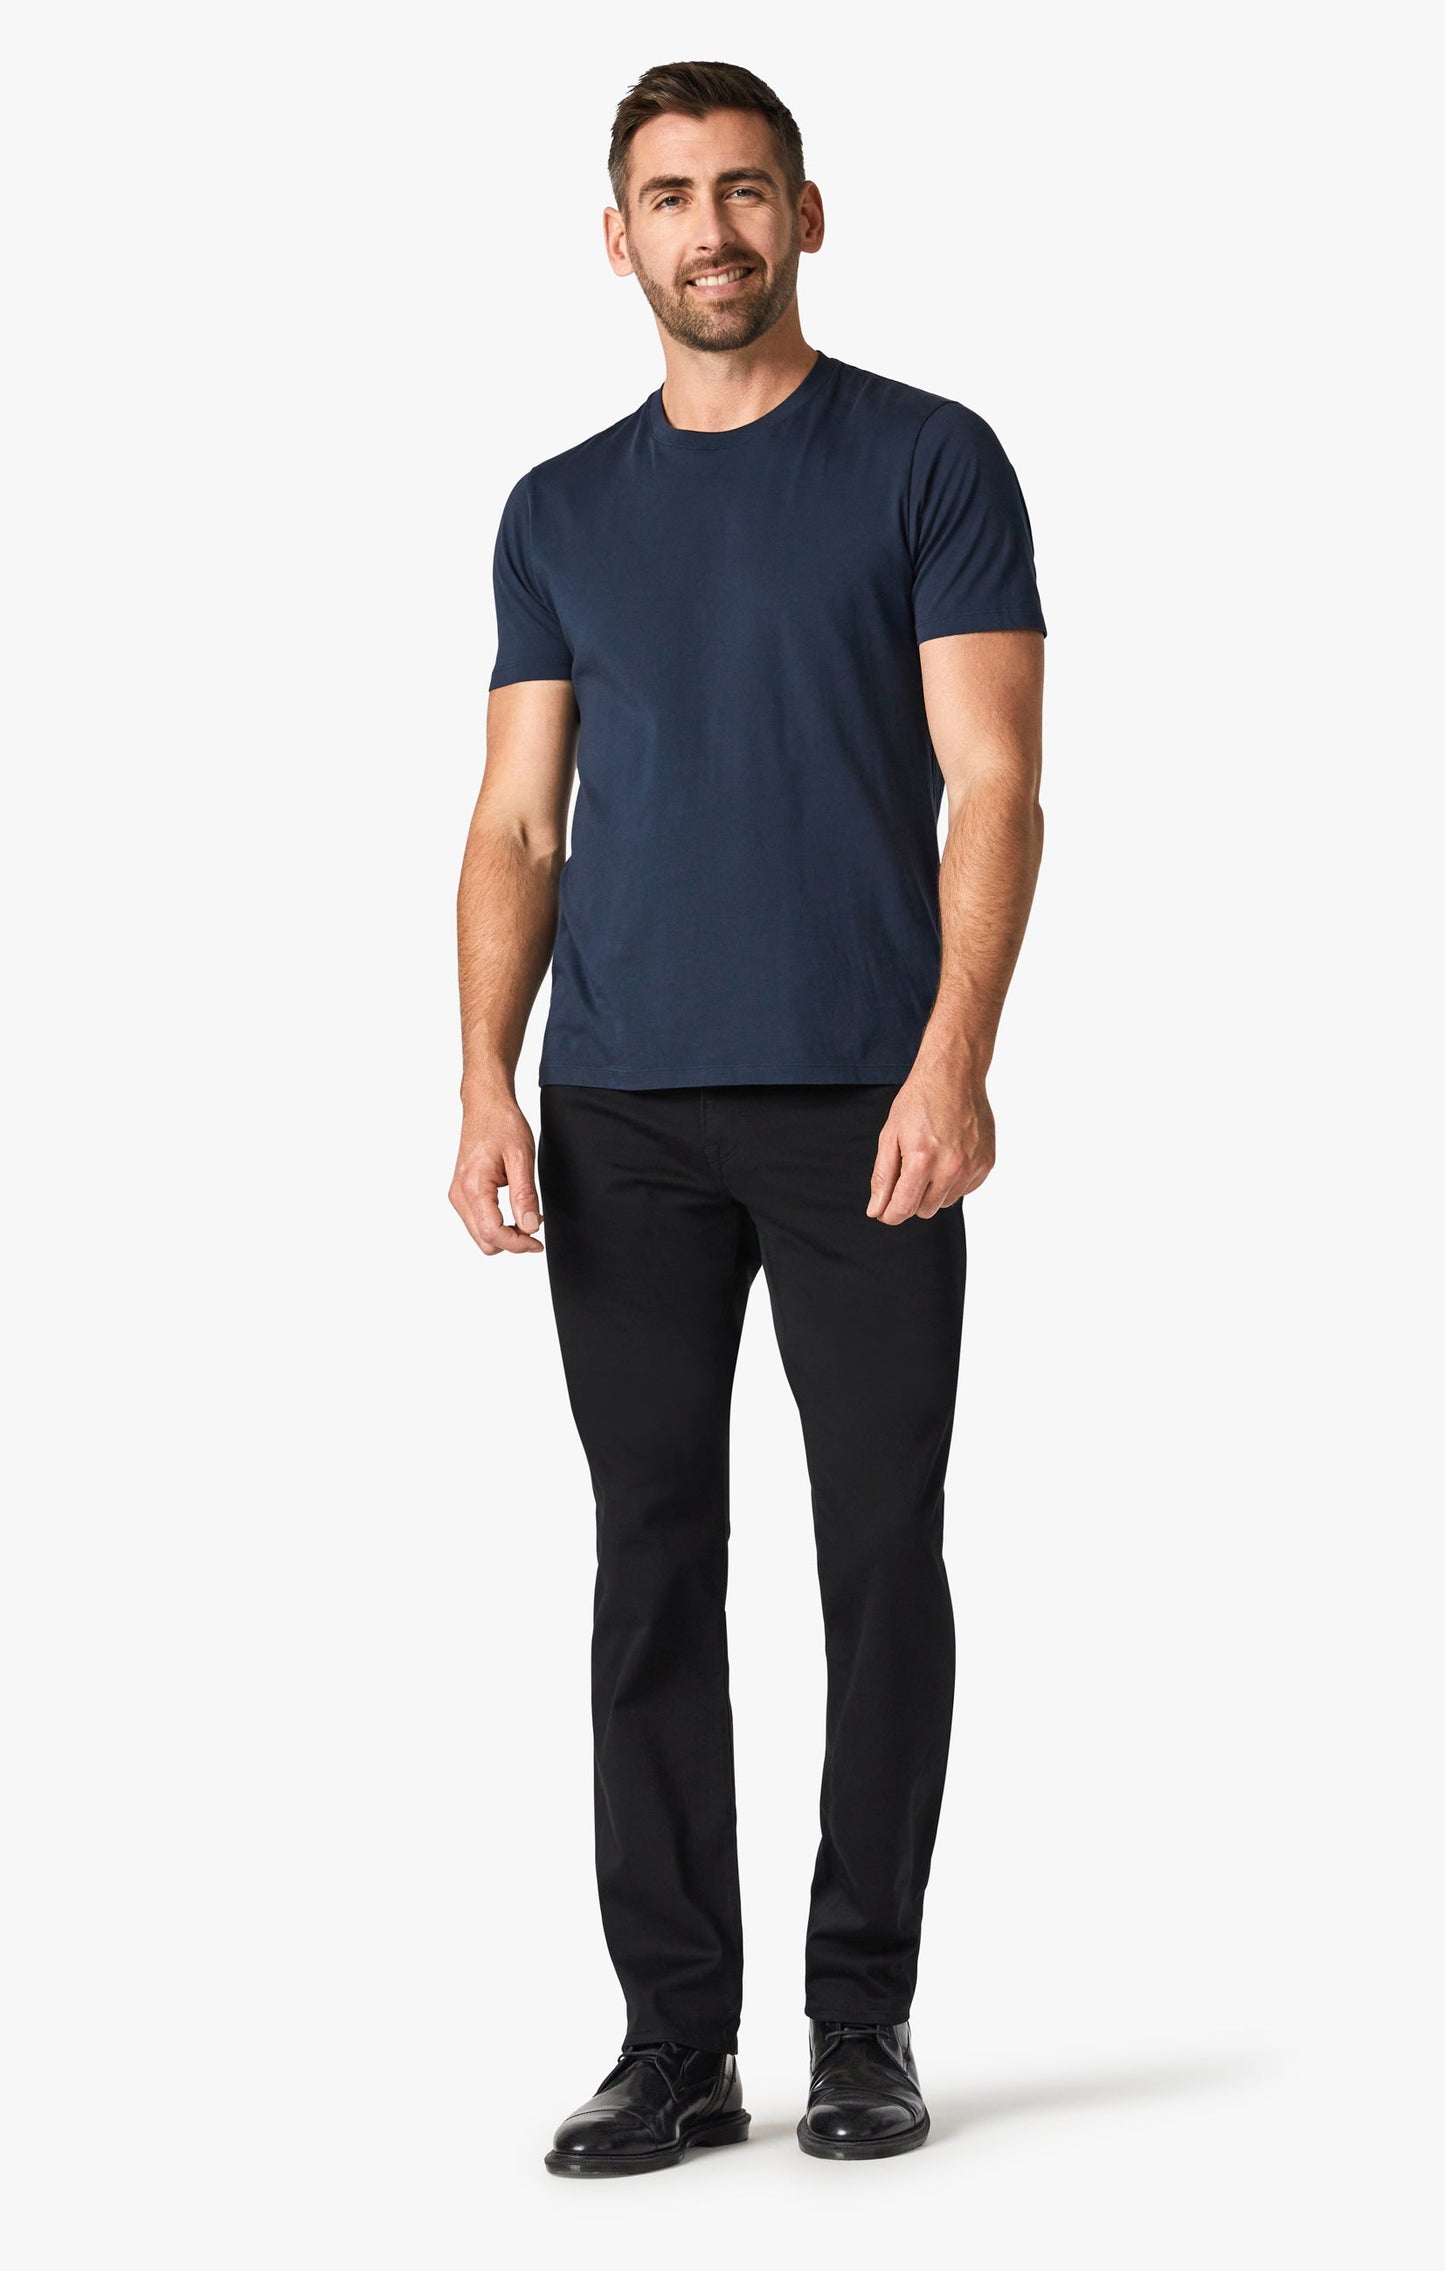 34 heritage stretch jeans